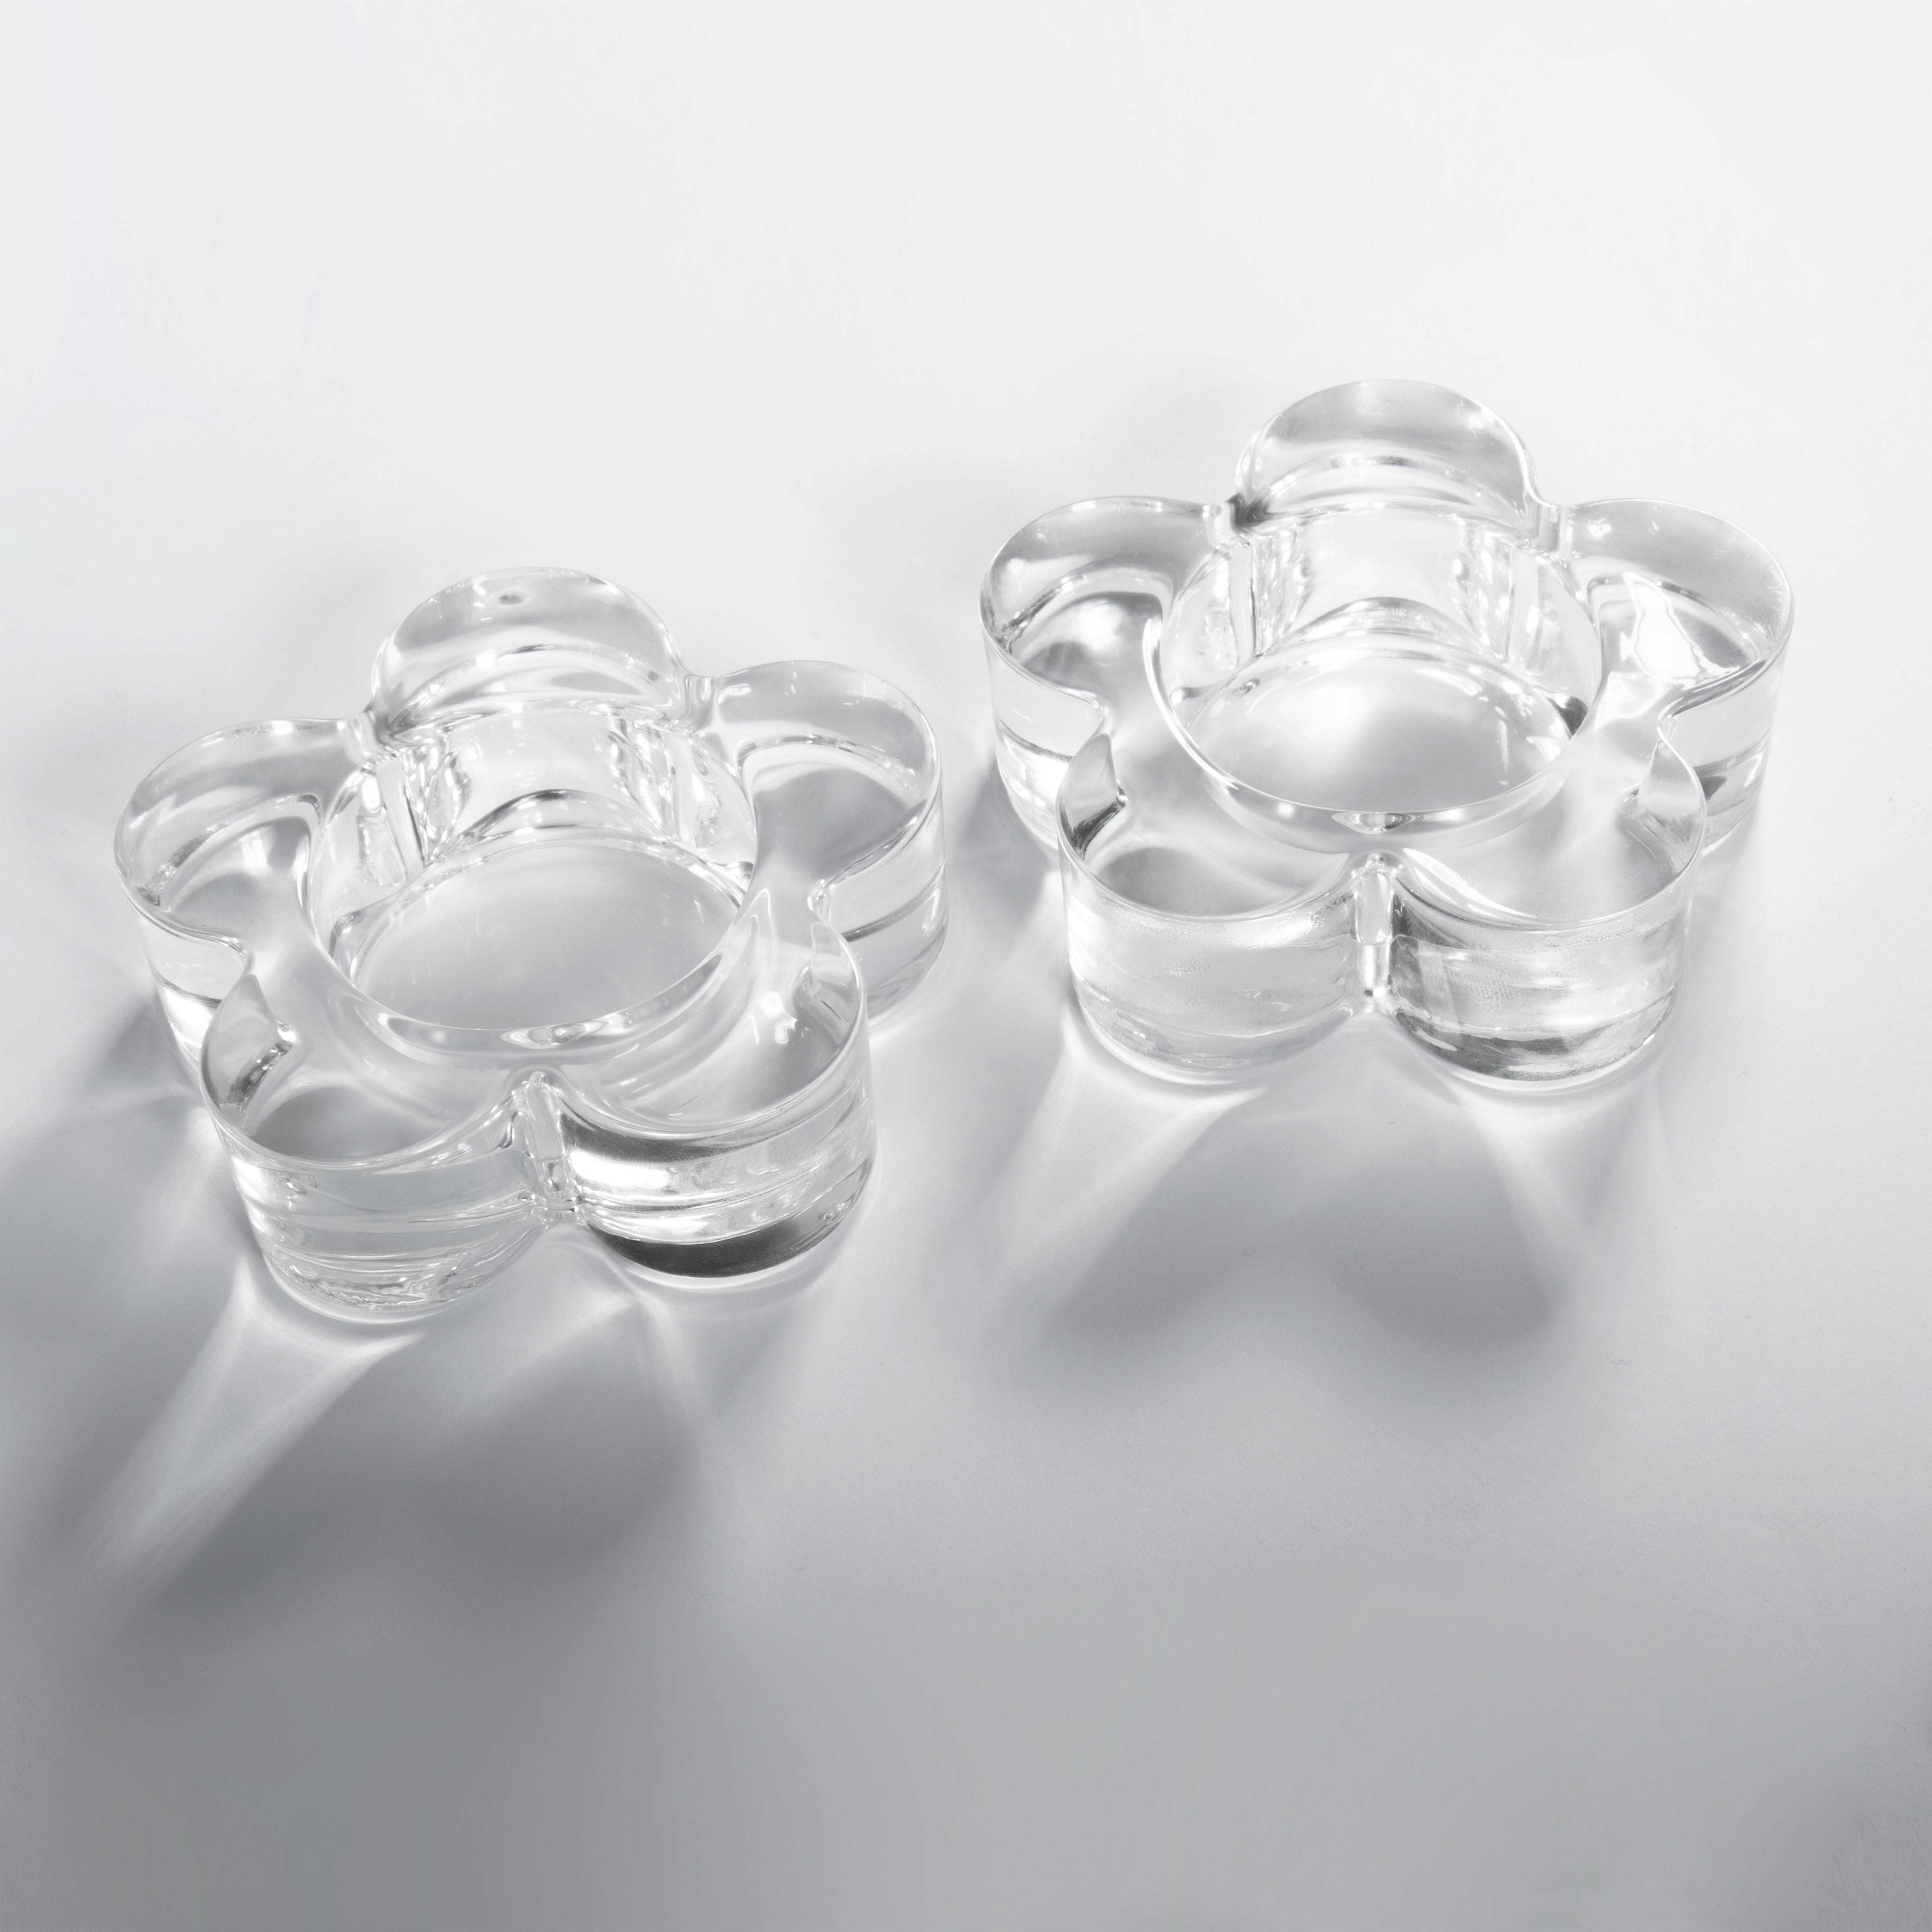 Pair of Tealight Candle Holders （Flower shape） - VAUCLUSE